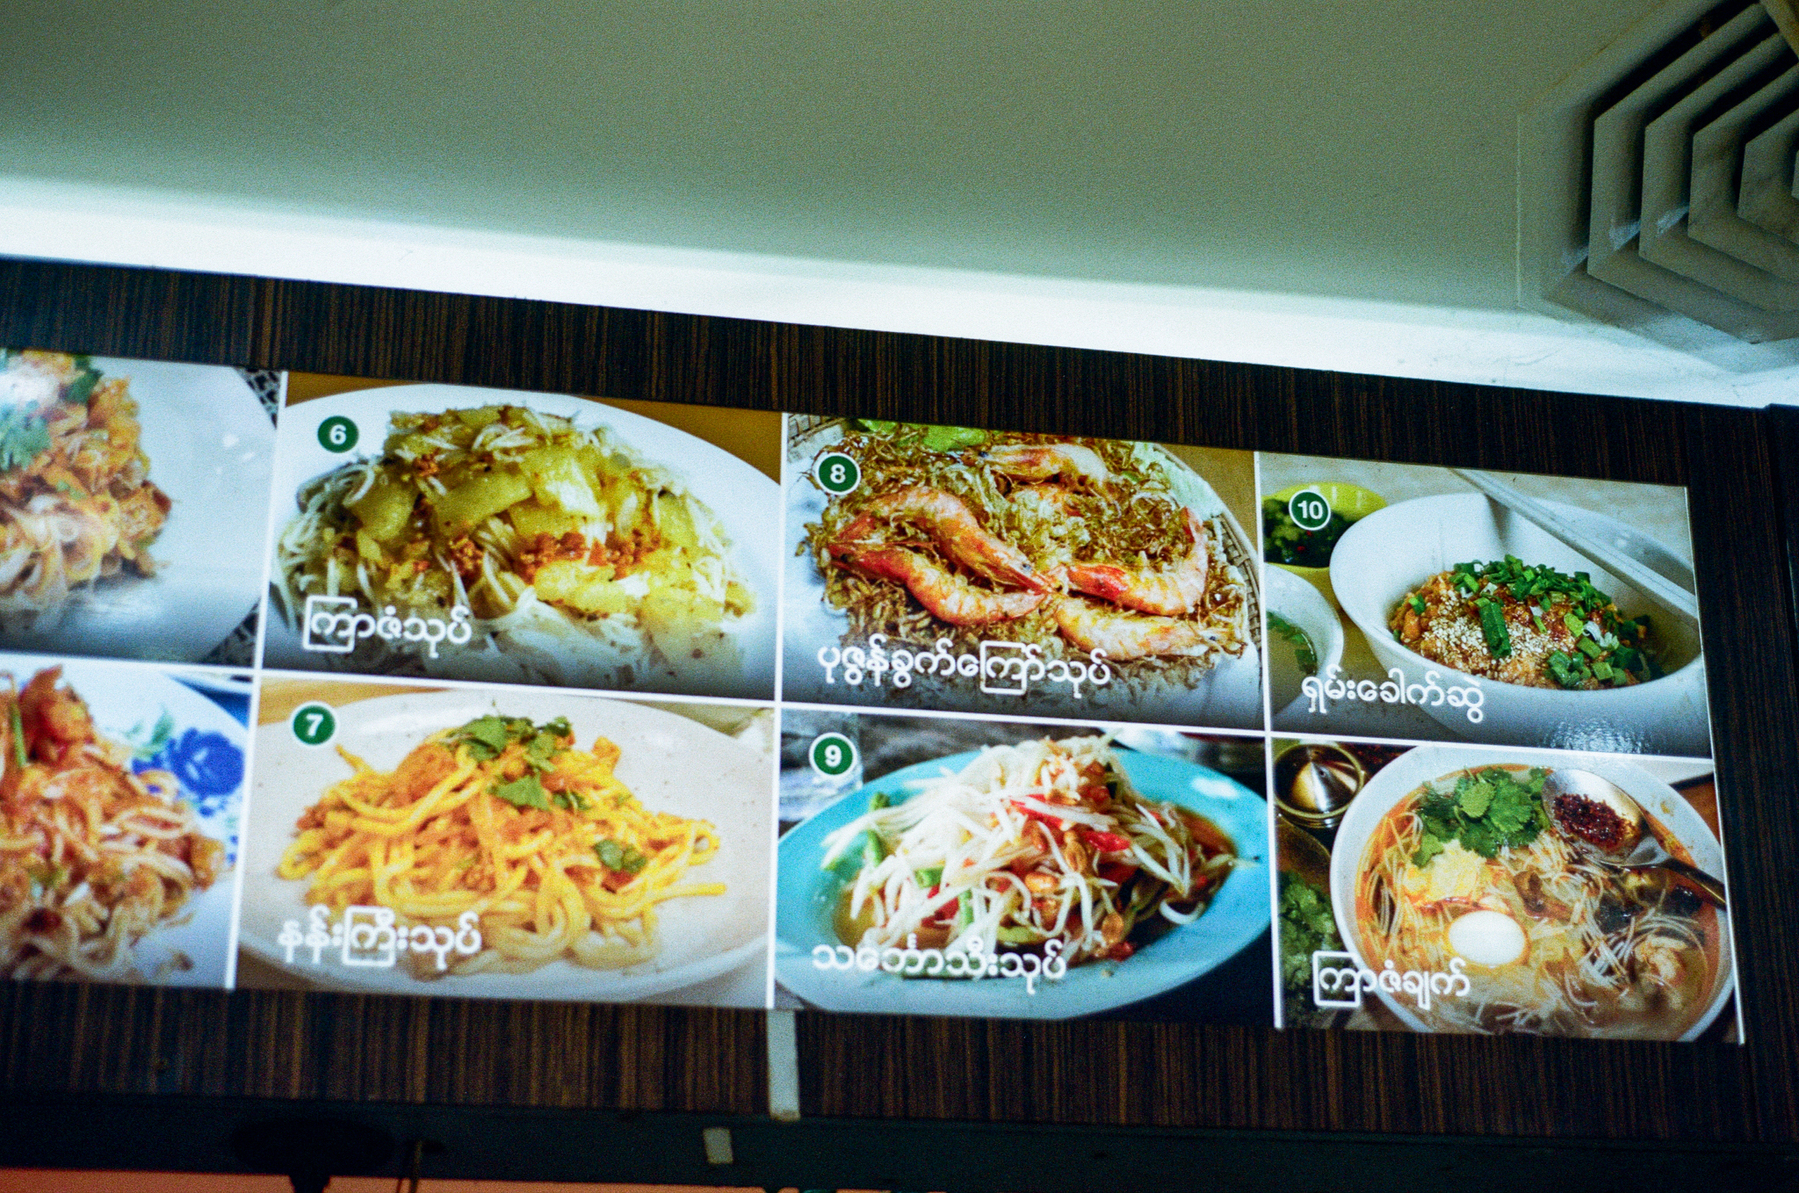 2. A scan of a color photo of a Burmese food menu at a restaurant, written entirely in Burmese